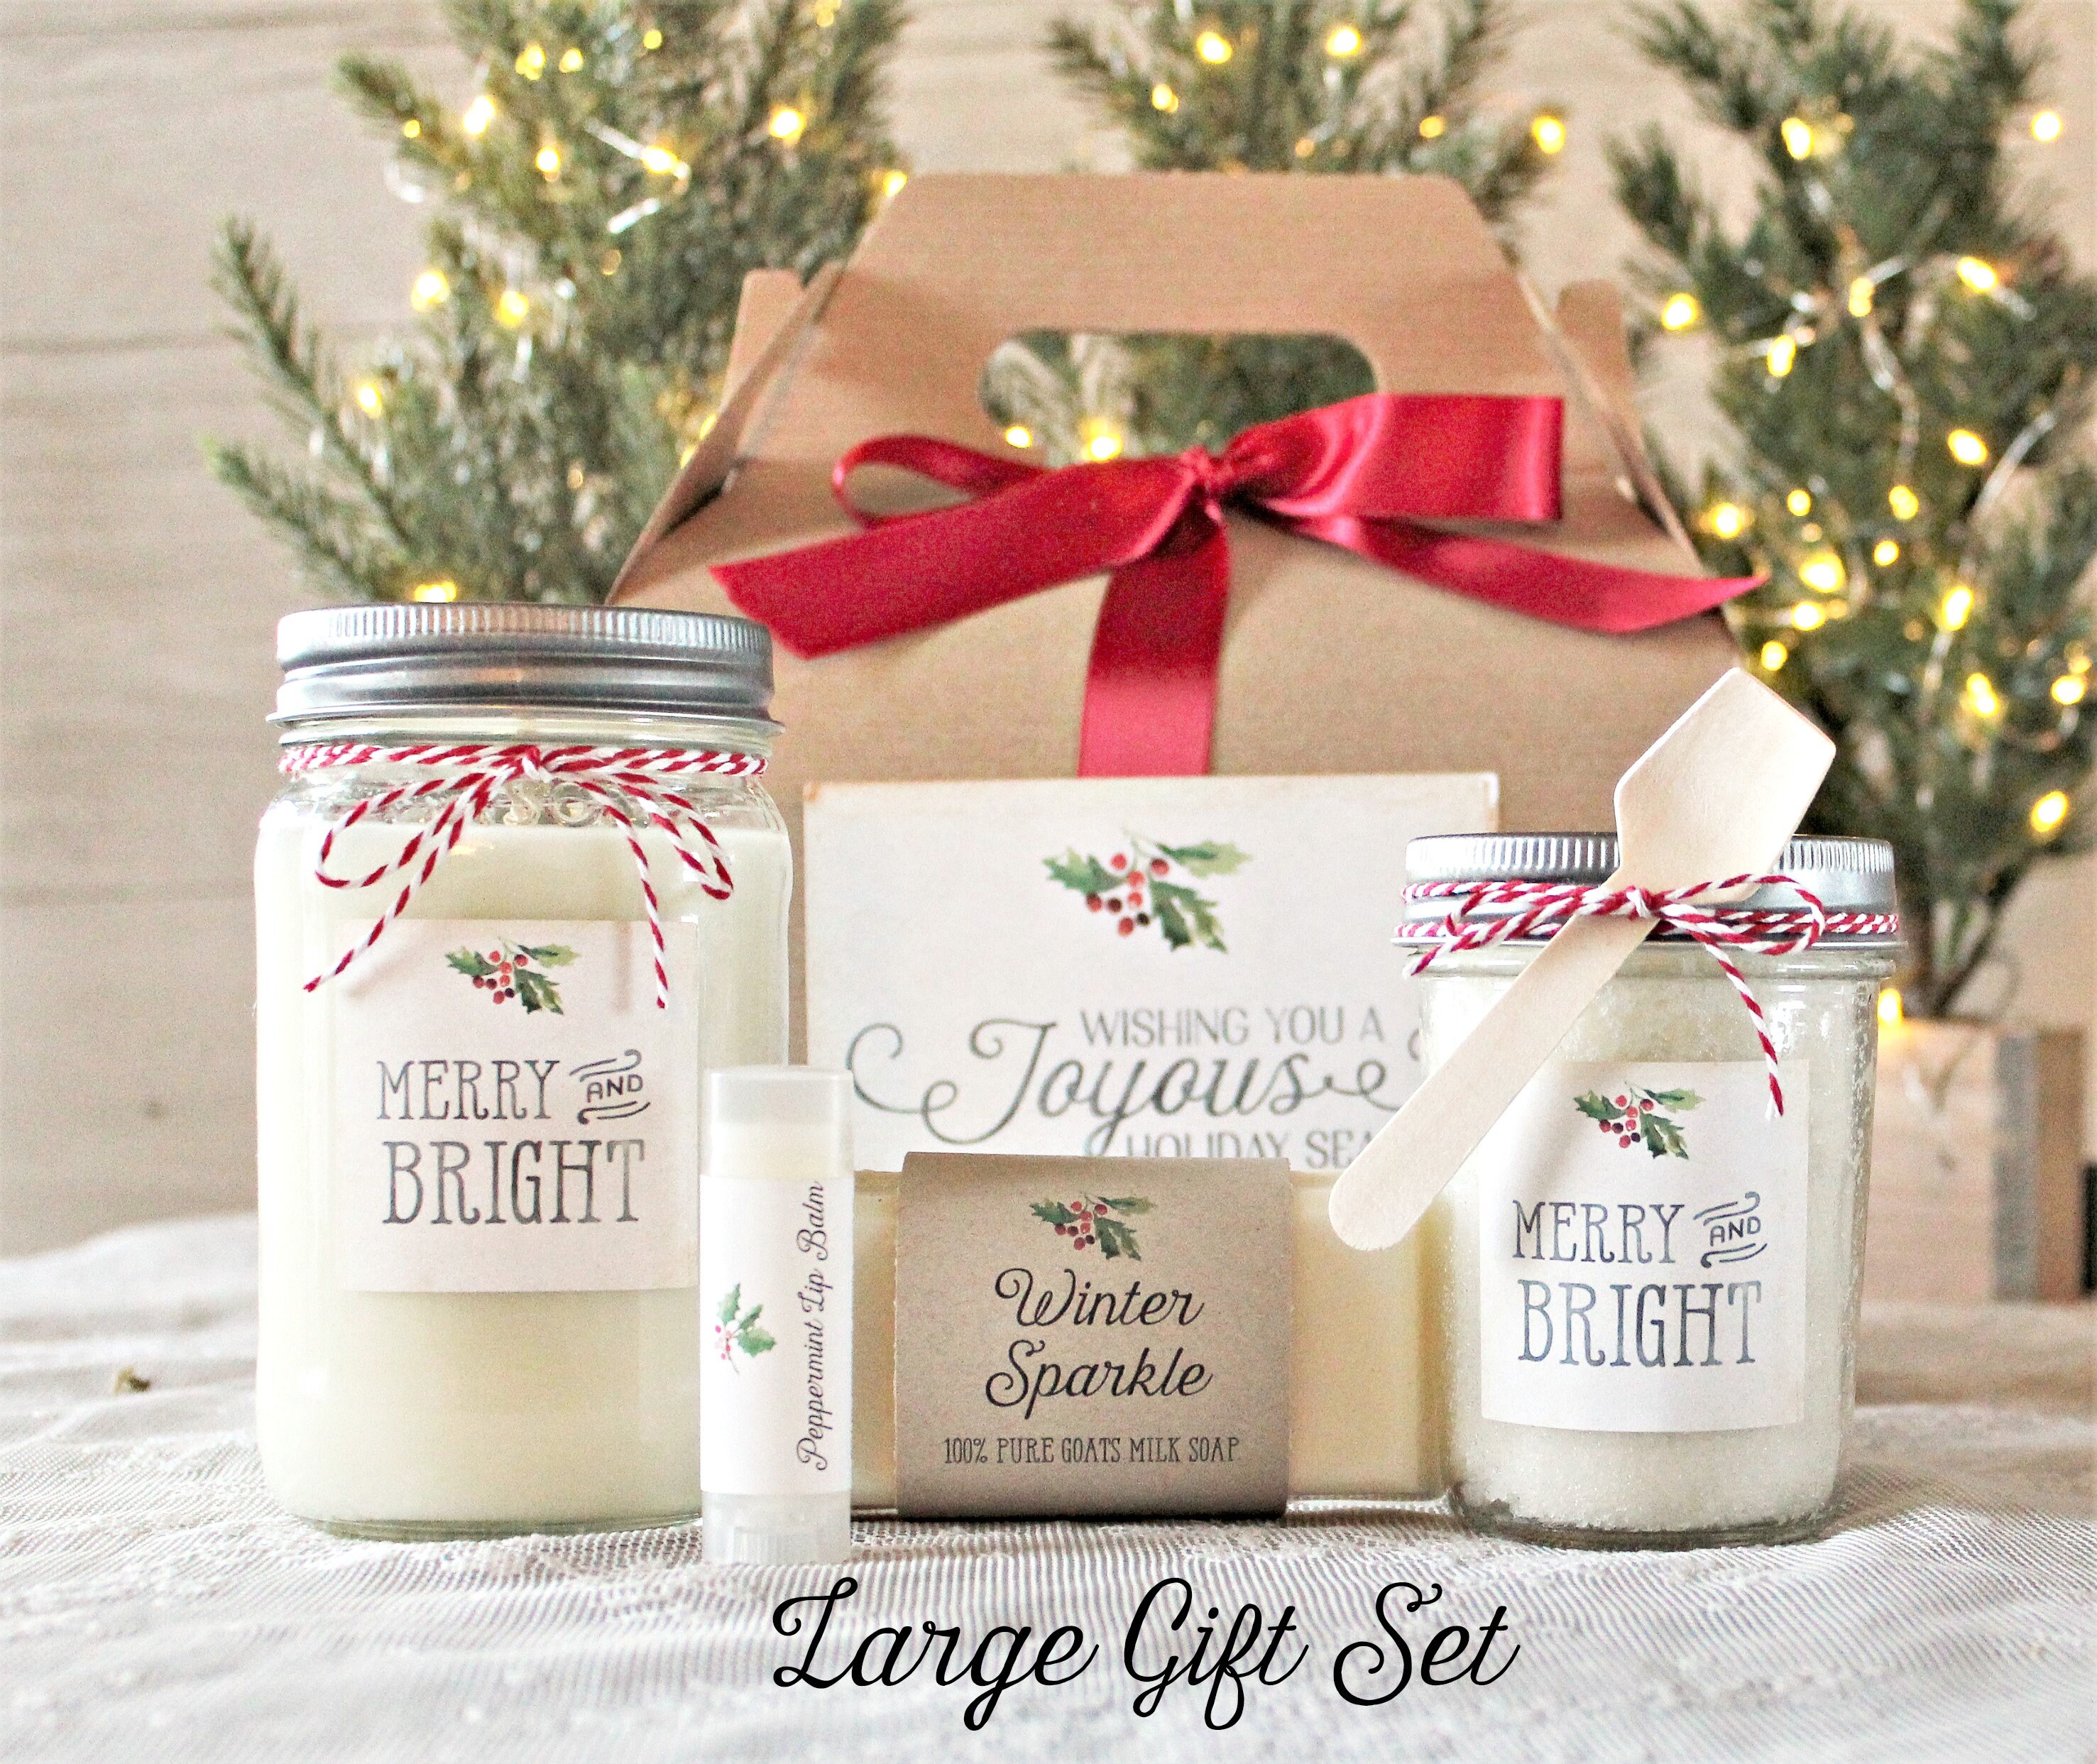 This Mason Jar Cocktail Is the Best Stocking Stuffer Idea for Adults - Brit  + Co